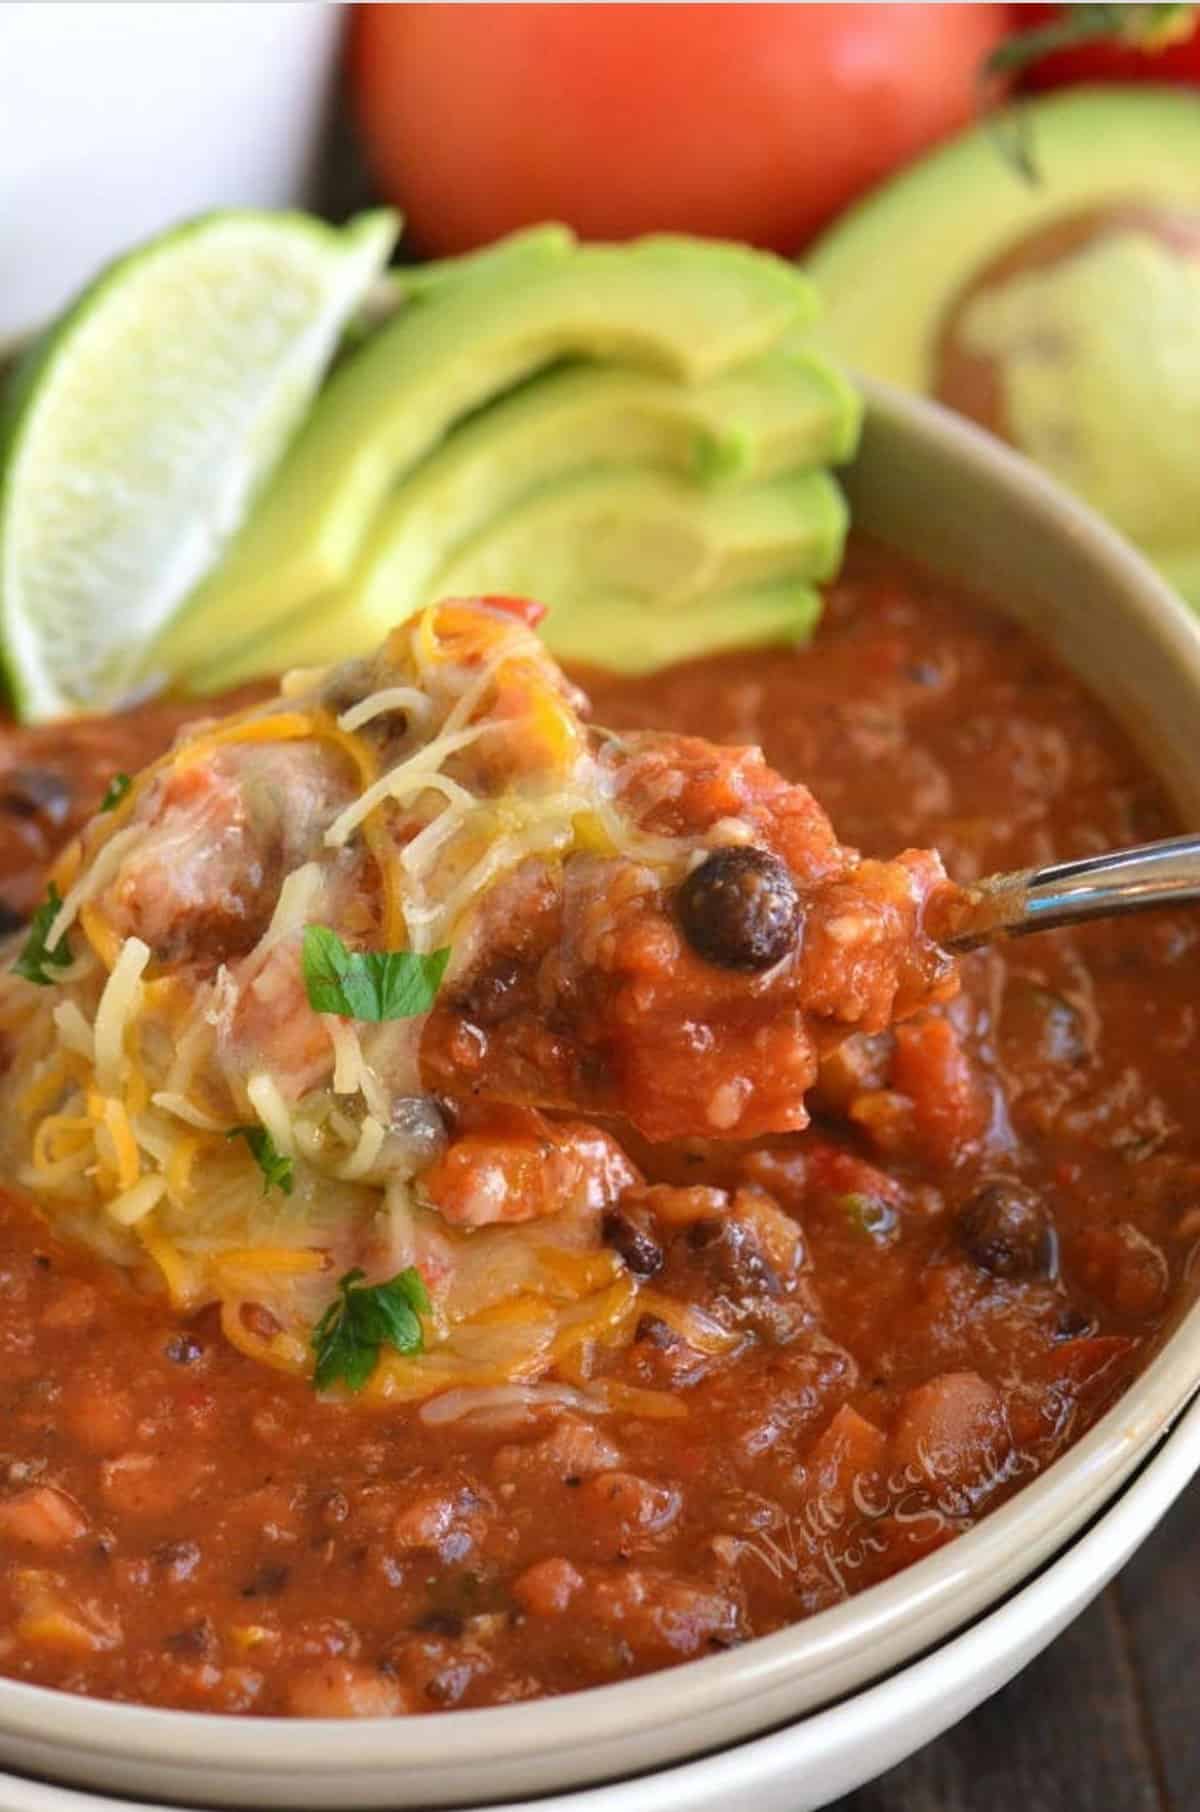 Vegetarian chili in a bowl with shredded cheese, lime, and avocado as garnish with spoon.